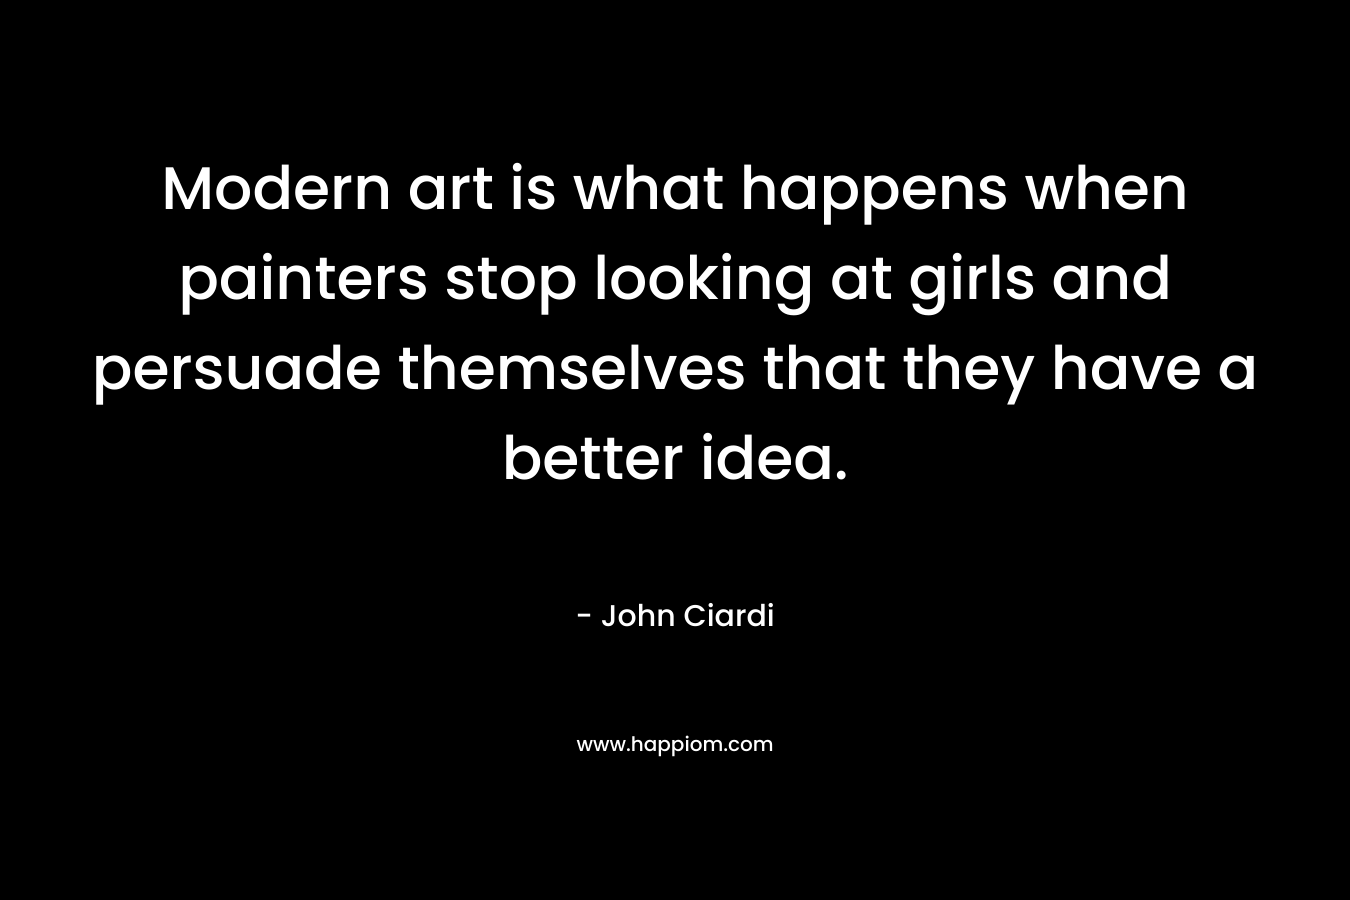 Modern art is what happens when painters stop looking at girls and persuade themselves that they have a better idea.